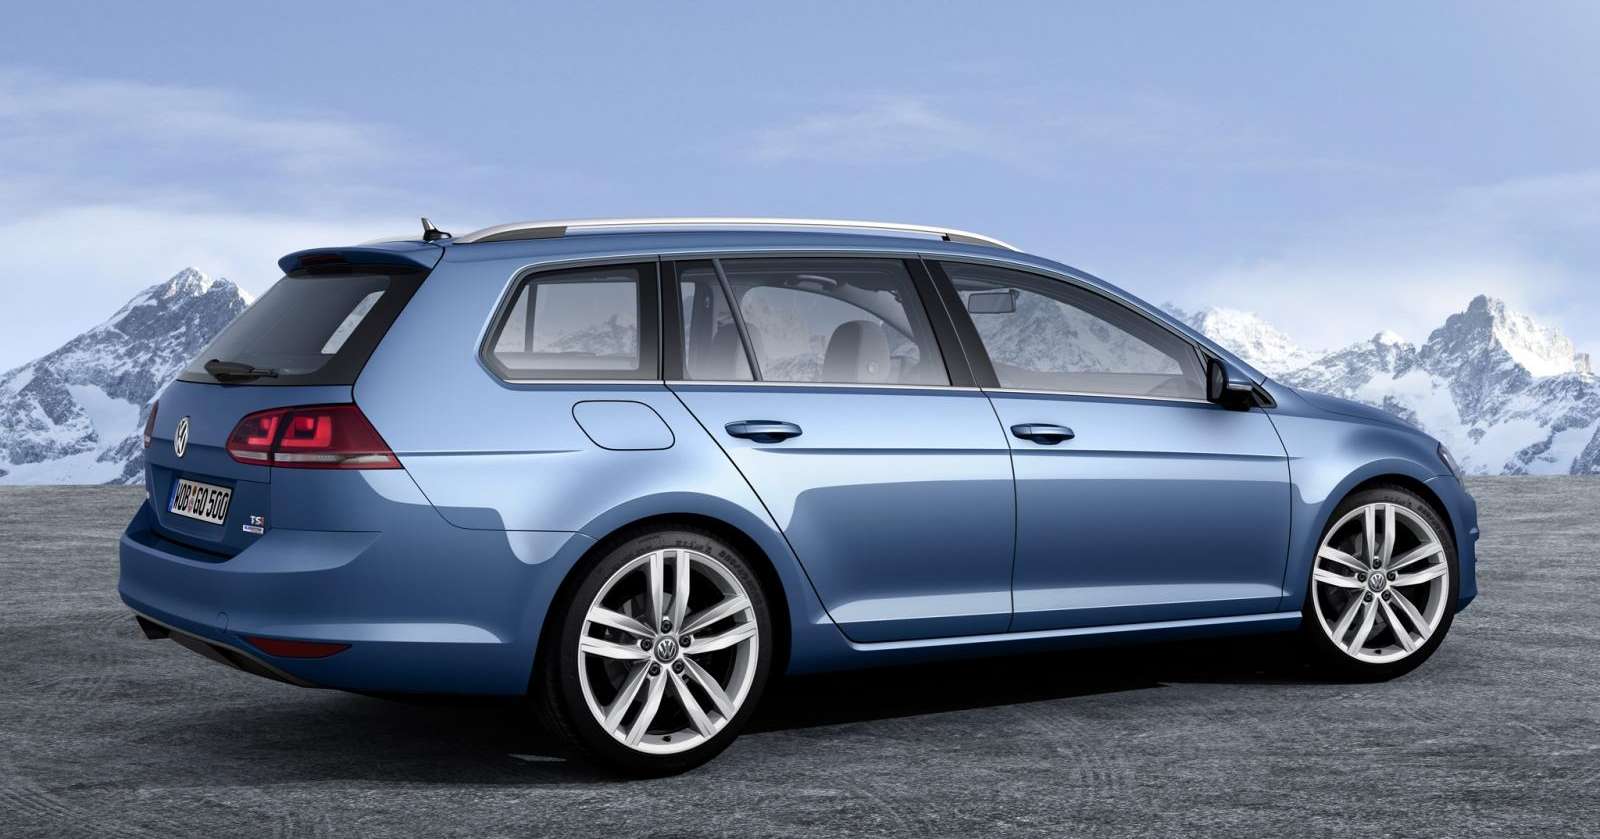 BREAKING NEWS VW GOLF 7 VARIANT FIRST OFFICIAL IMAGES